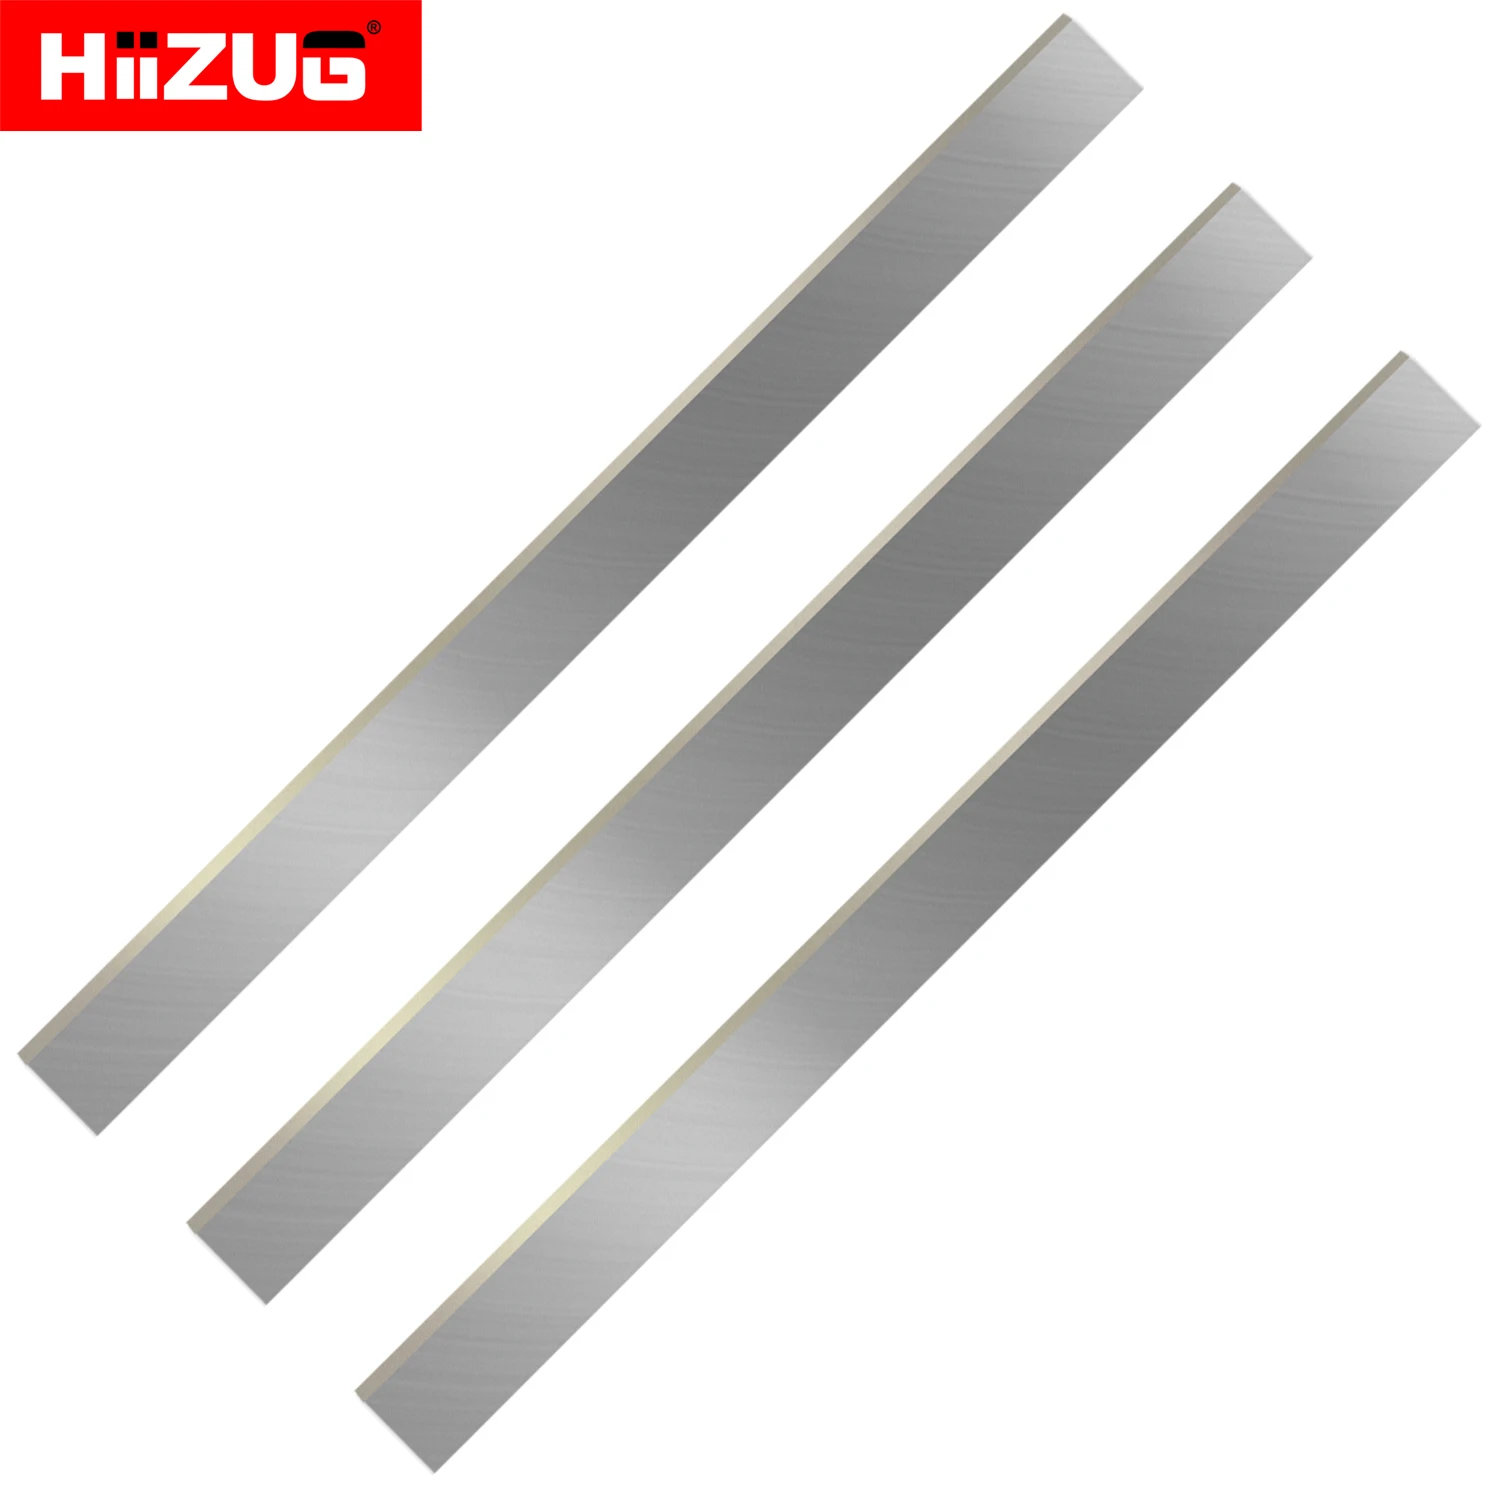 460×25×3mm Planer Blades Knives for Woodworking Electric Planer Thicknesser Jointer Cutter Heads Set of 3 210×25×3mm planer blades knife for woodworking thicknesser surface planer jointer cutterhead eads set of 3 pieces